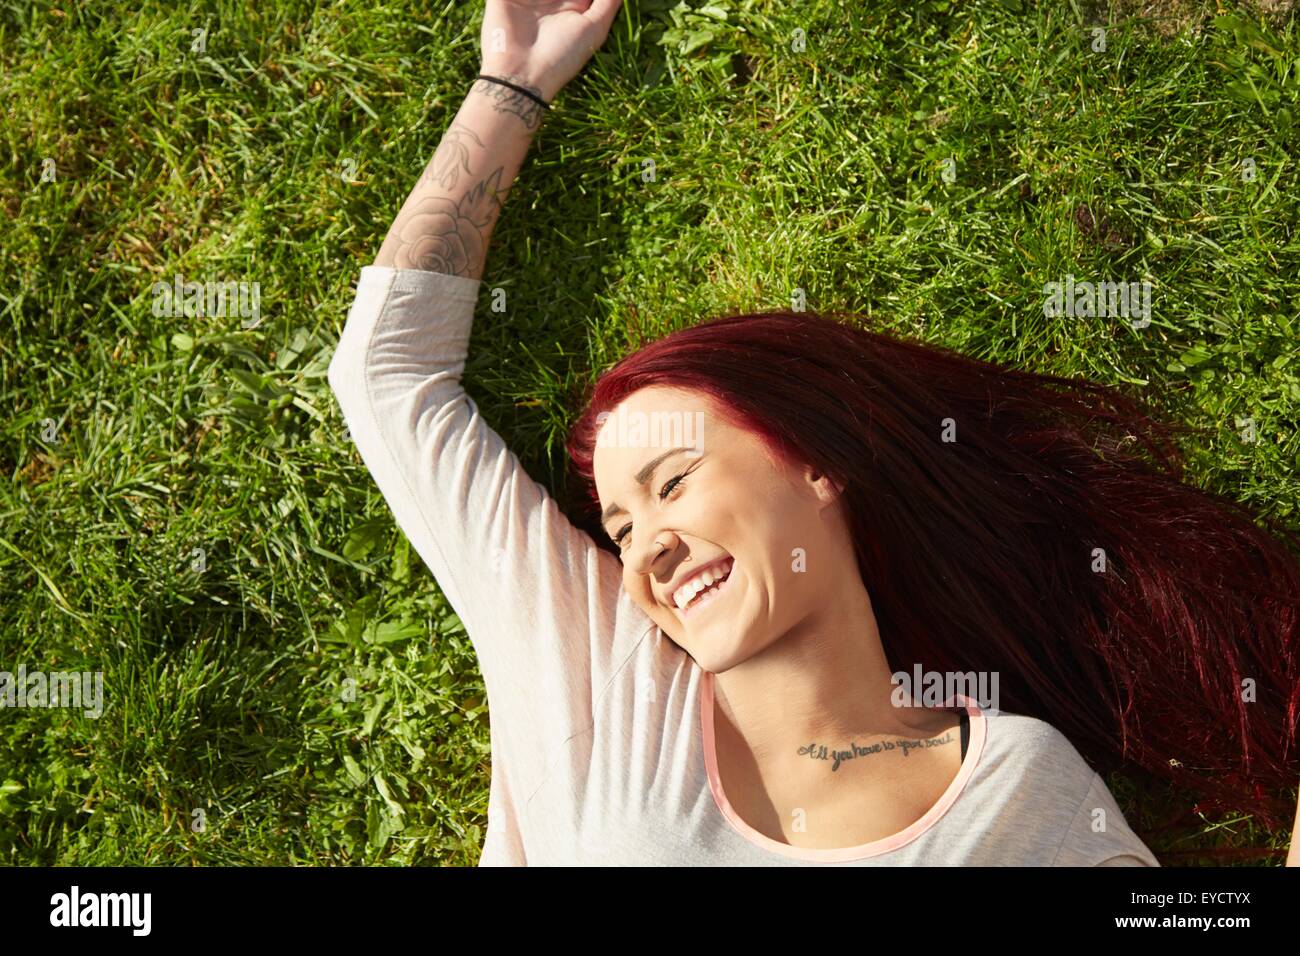 Overhead view of young woman lying on grass laughing Stock Photo